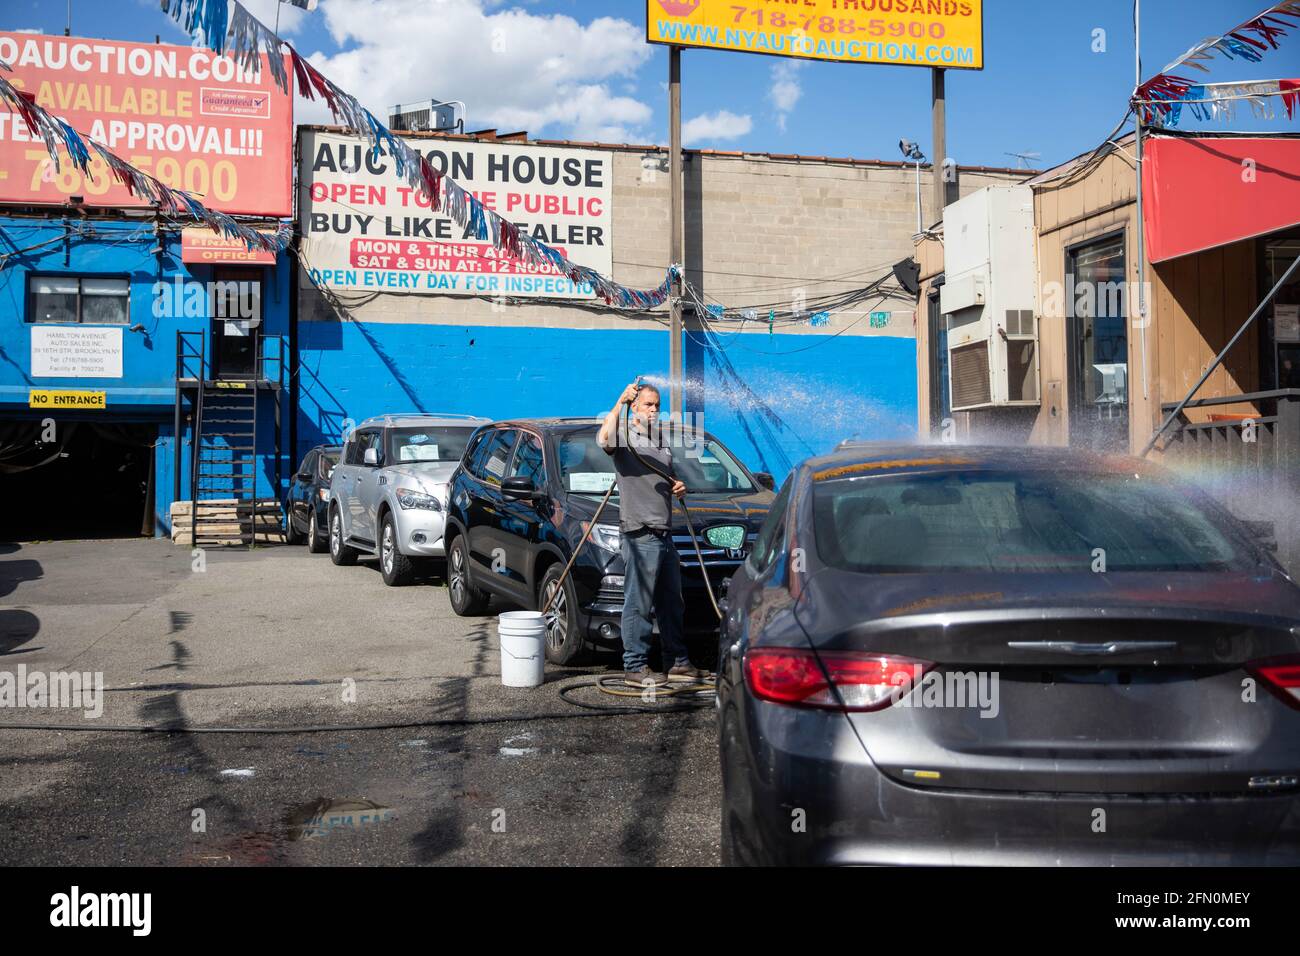 New York, USA. 12th May, 2021. A worker washes a car at Hamilton Avenue Auto Sales, a used car dealership in the Brooklyn borough of New York, the United States, on May 12, 2021. U.S. consumer prices rose 0.8 percent in April, with a 12-month increase of 4.2 percent, the U.S. Labor Department reported Wednesday. This marked the largest 12-month growth since a 4.9-percent increase for the period ending September 2008, according to the report. Credit: Michael Nagle/Xinhua/Alamy Live News Stock Photo